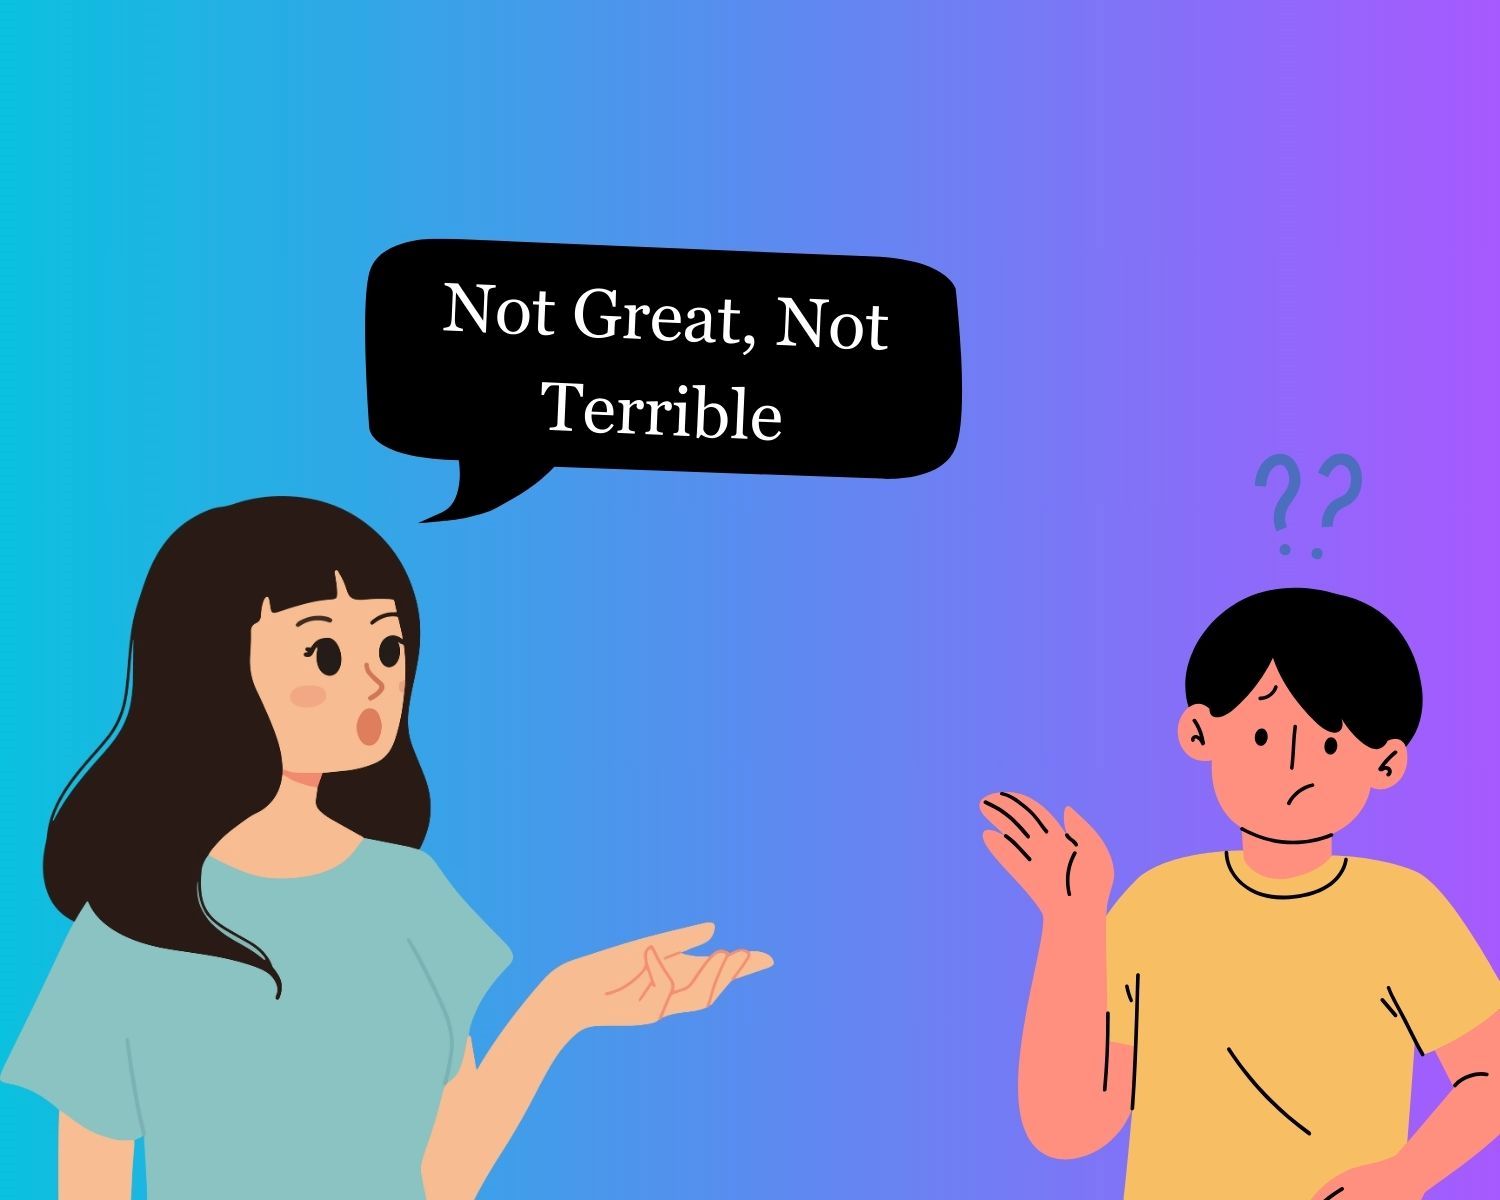 The Meaning Behind “Not Great, Not Terrible”